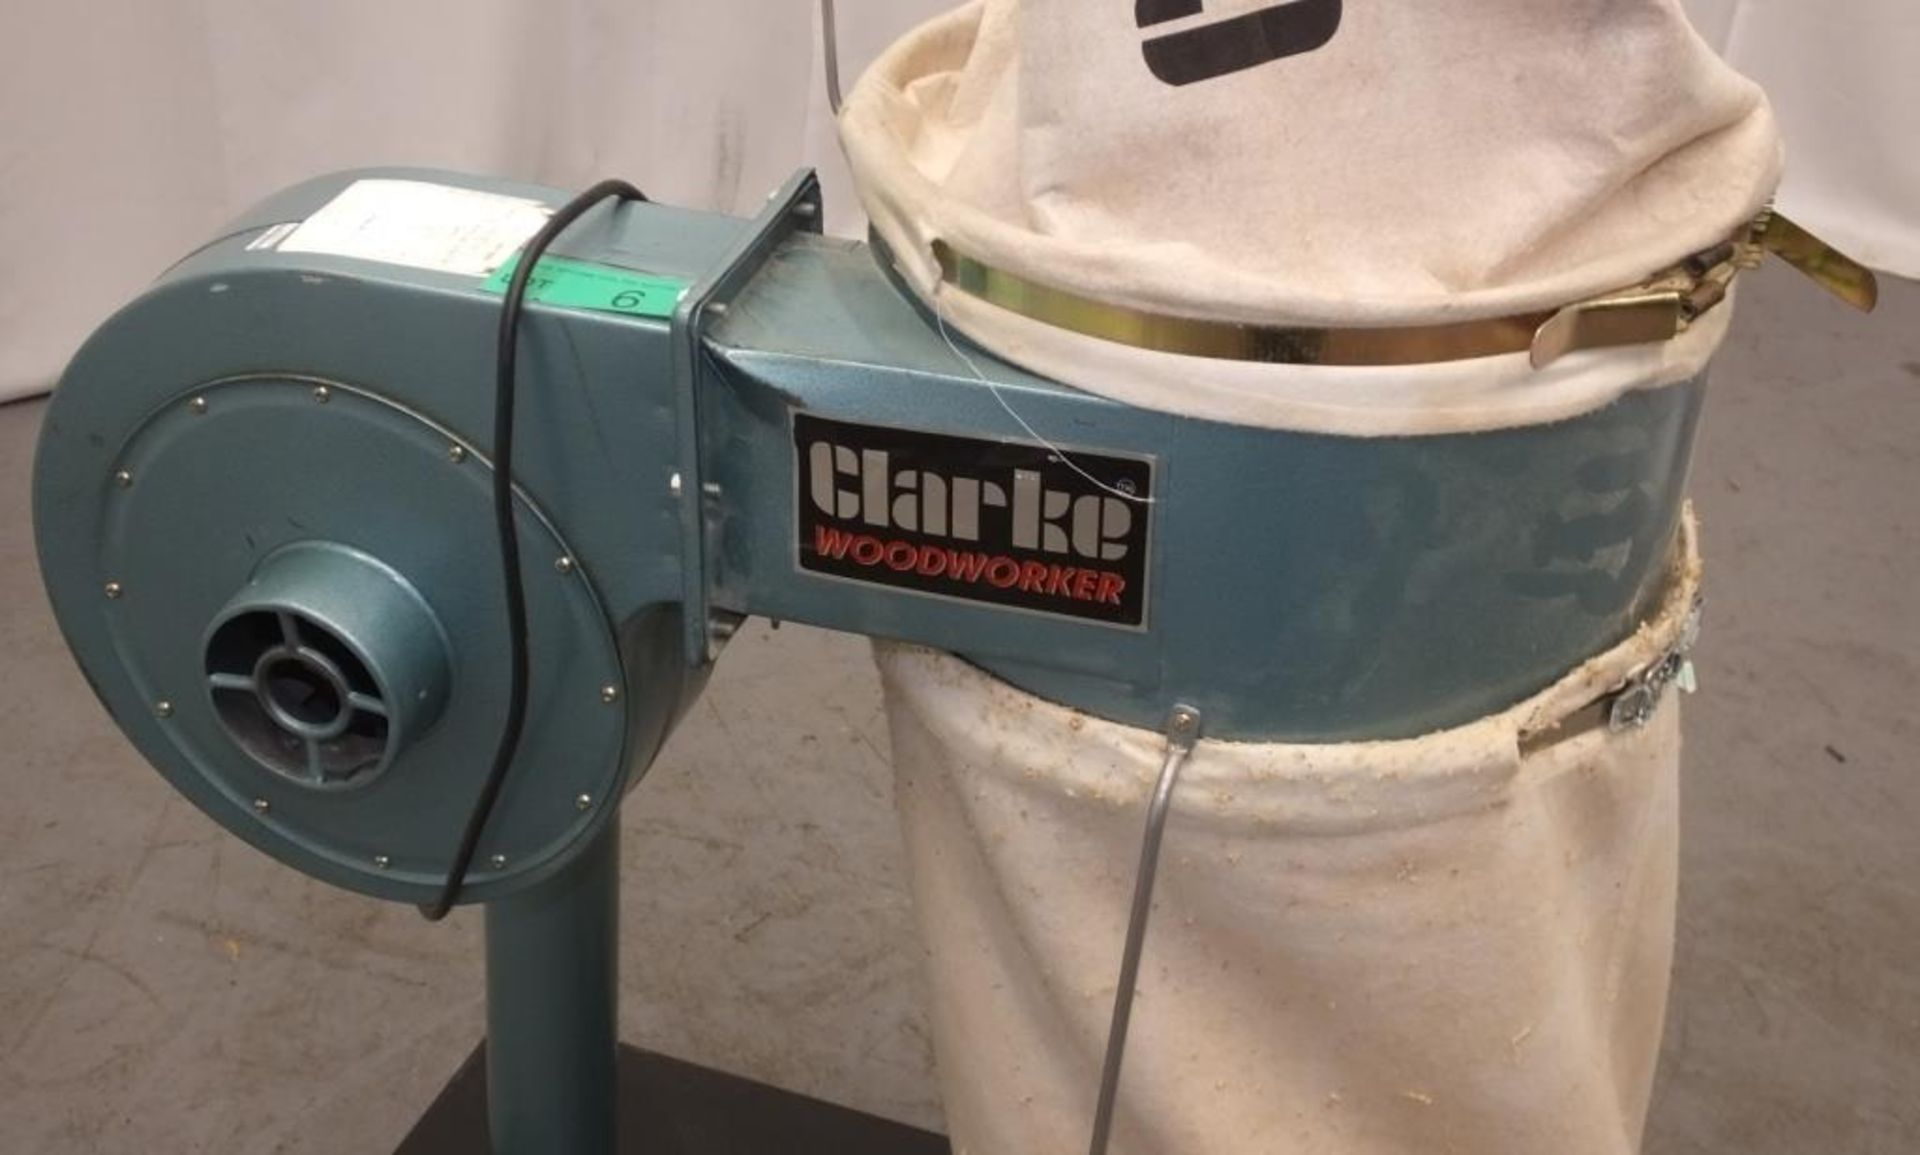 Clarke woodworker extraction system - CDE7B - 230 VAC - 50hz - 1hp - motor speed 2970 RPM - Image 2 of 7